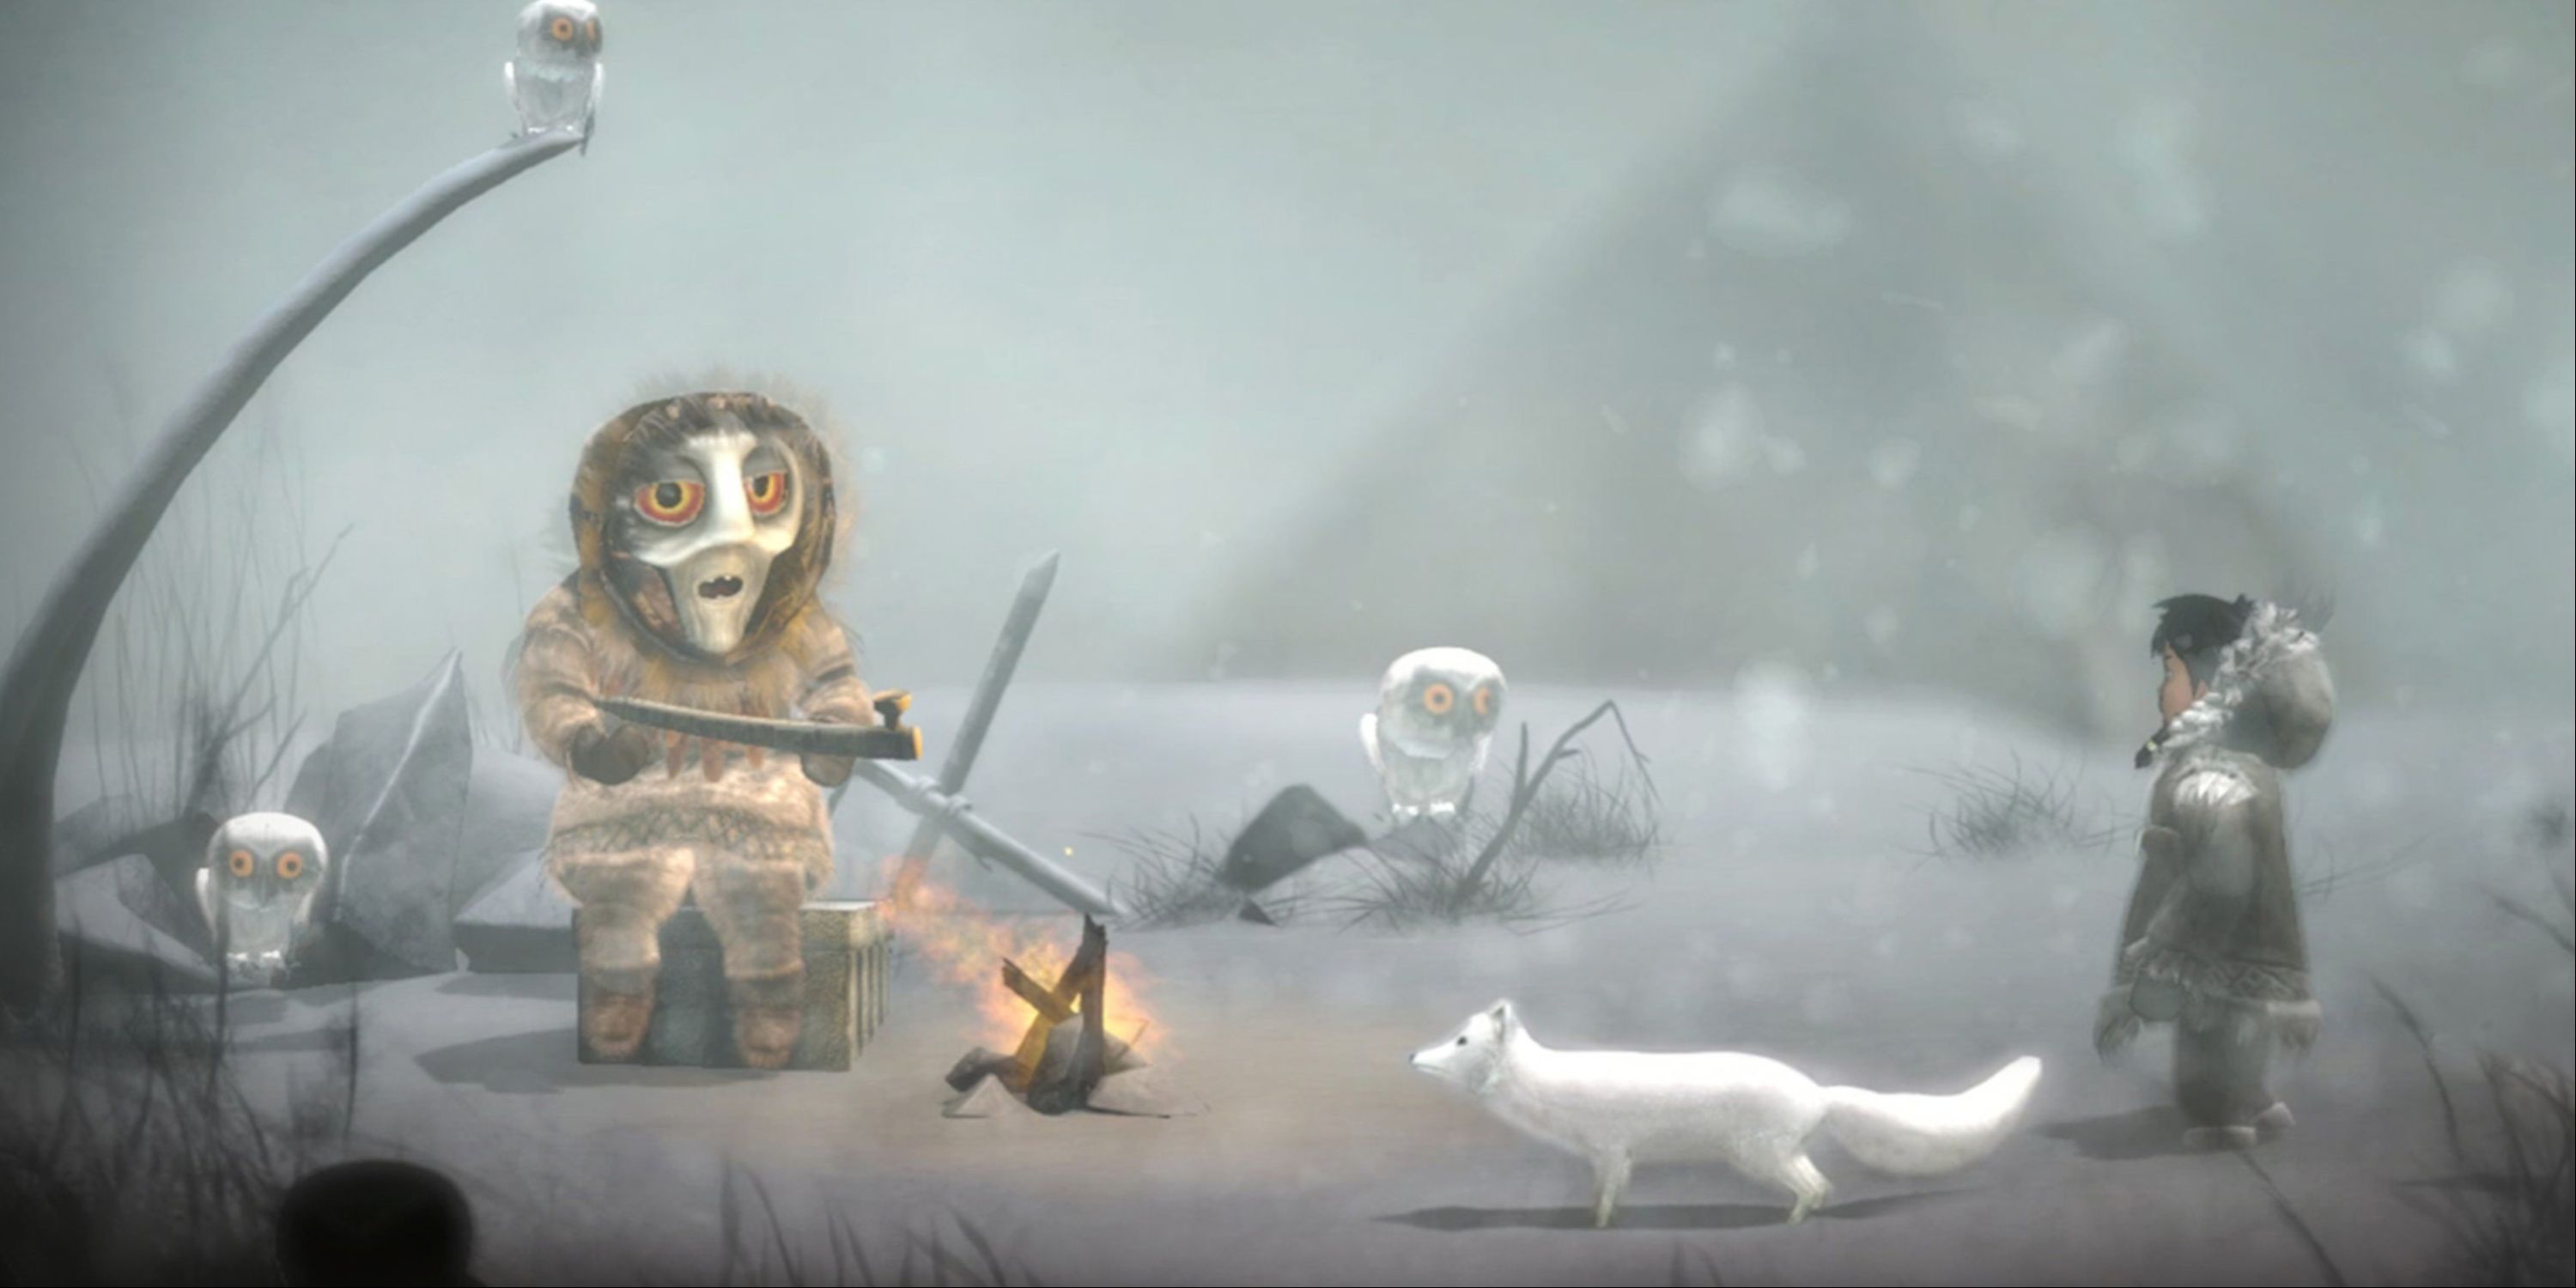 Never Alone is a retelling of an Inupiaq legend